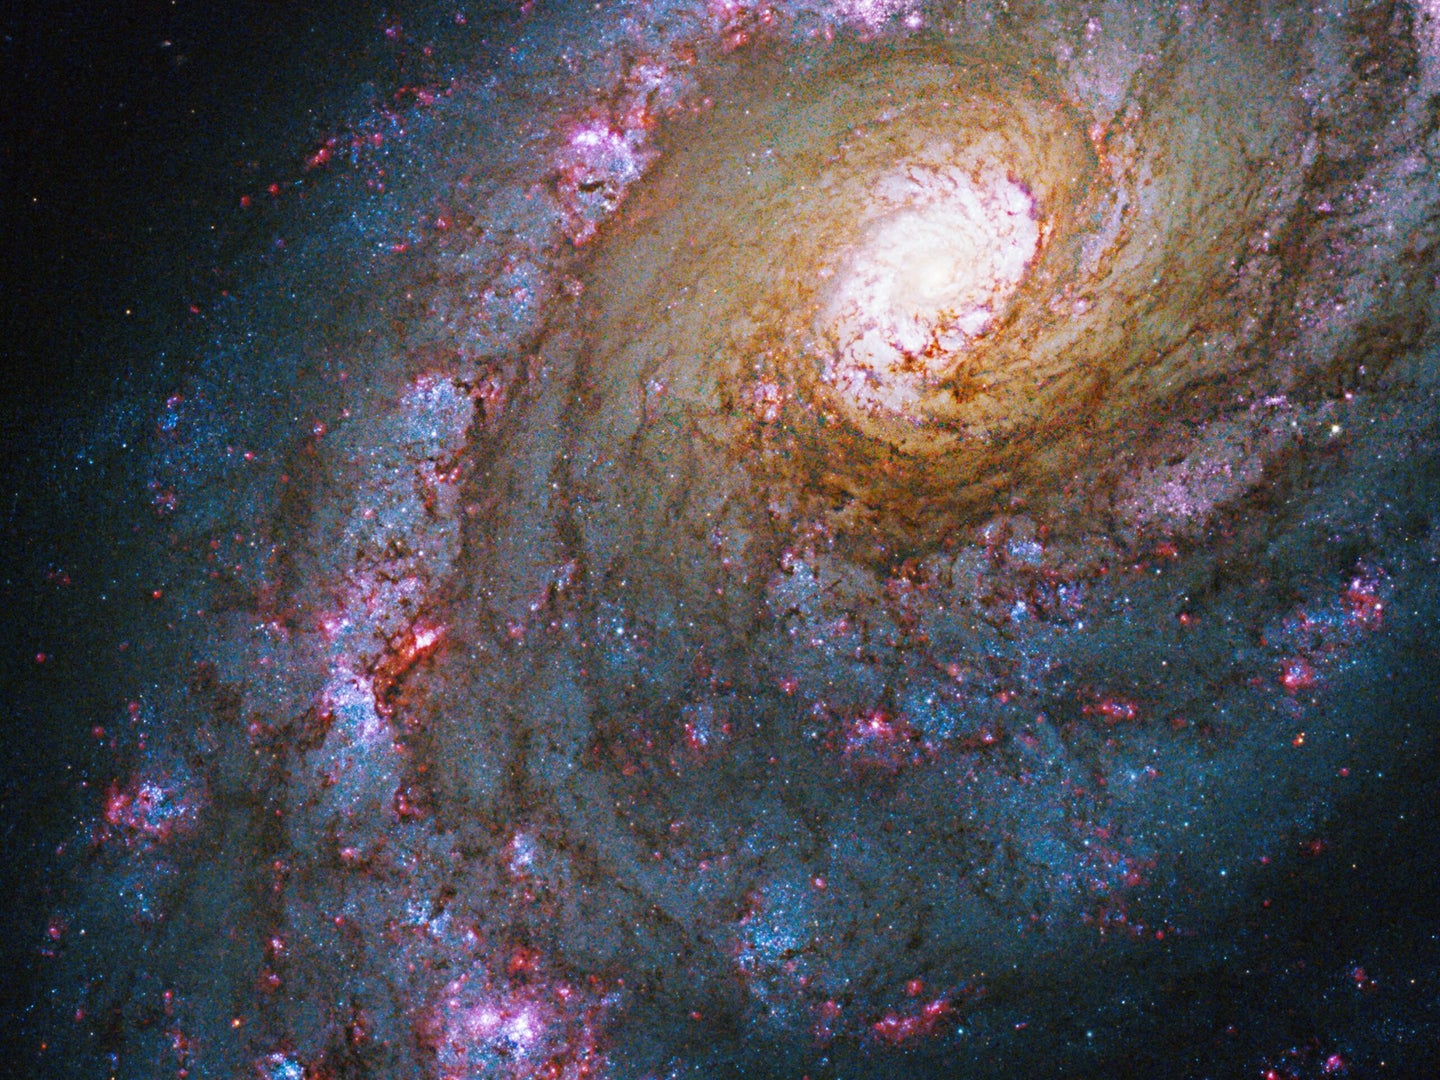 This image of Caldwell 45, captured by Hubble’s Wide Field Camera 3, provides a larger view, showing more of the galaxy. The bluish color swirling around the galaxy’s center indicates the presence of young, hot stars in Caldwell 45’s spiral arms.